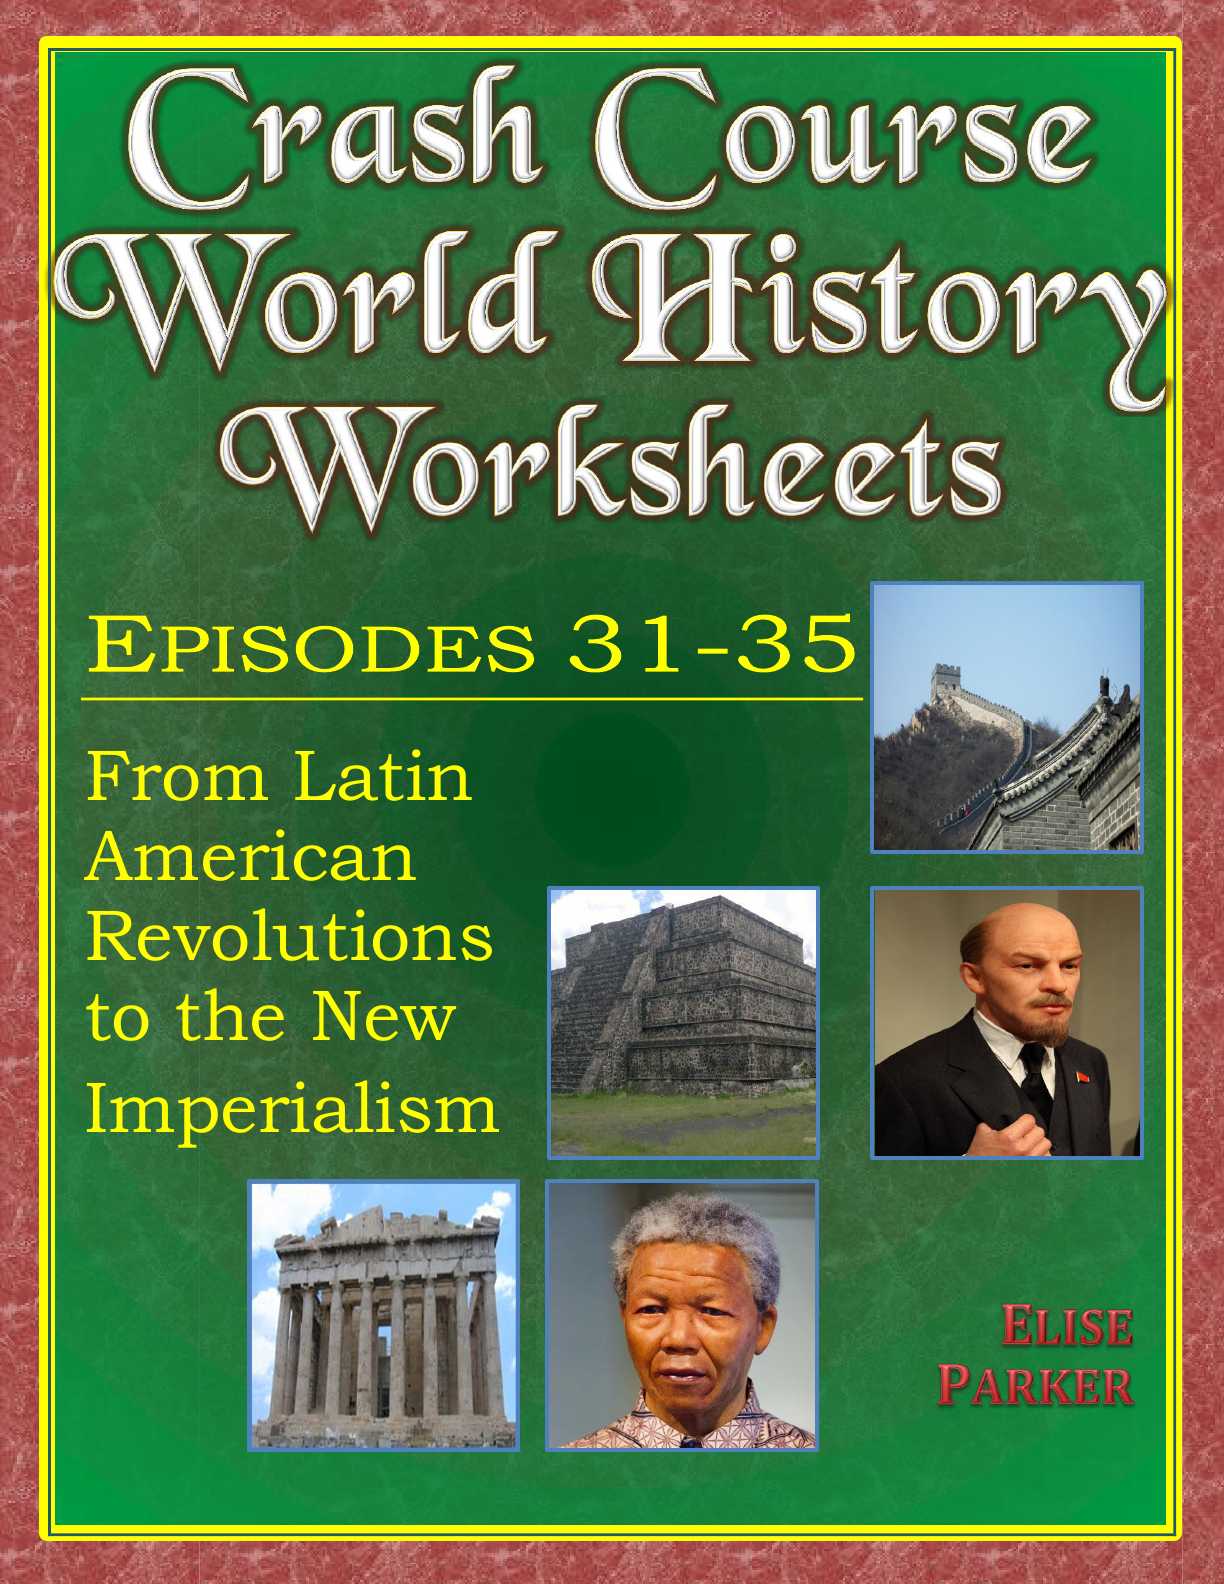 The Enlightenment Worksheet Answer Key and Crash Course World History Worksheets for Episodes 11 15 Of This